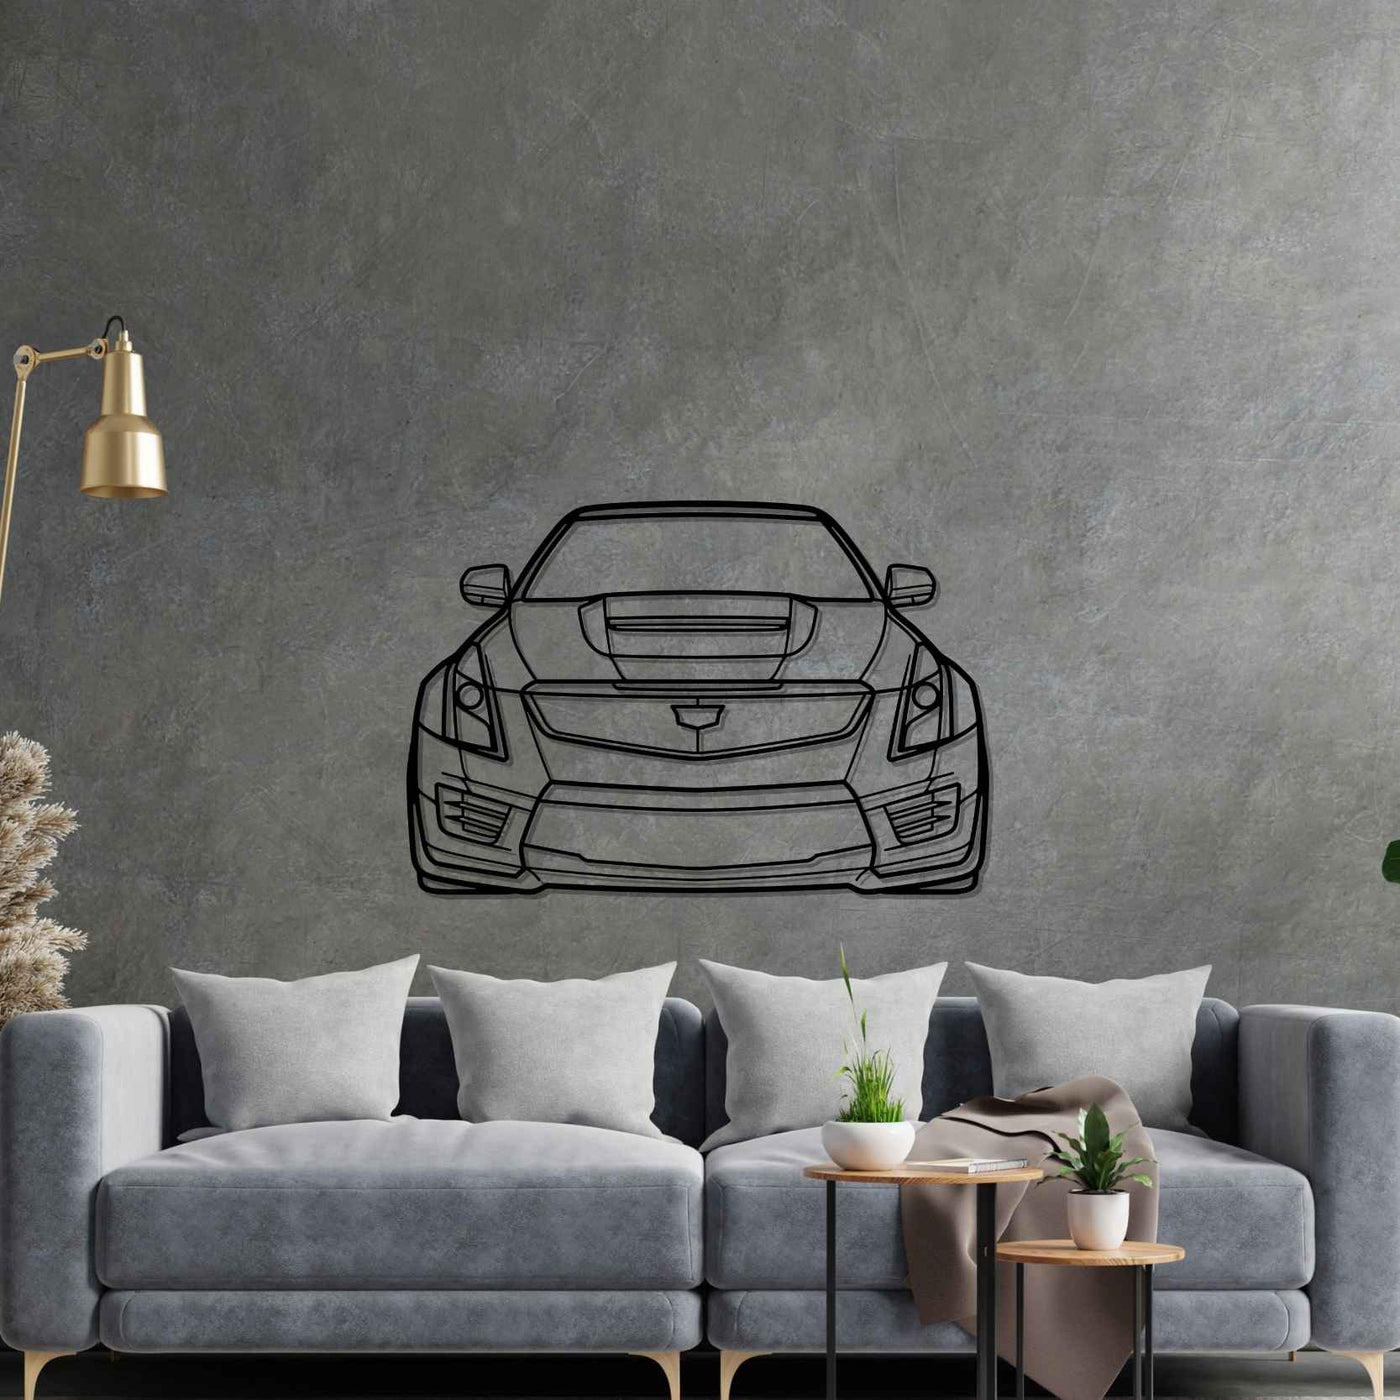 ATS-V 2017 Front Silhouette Metal Wall Art